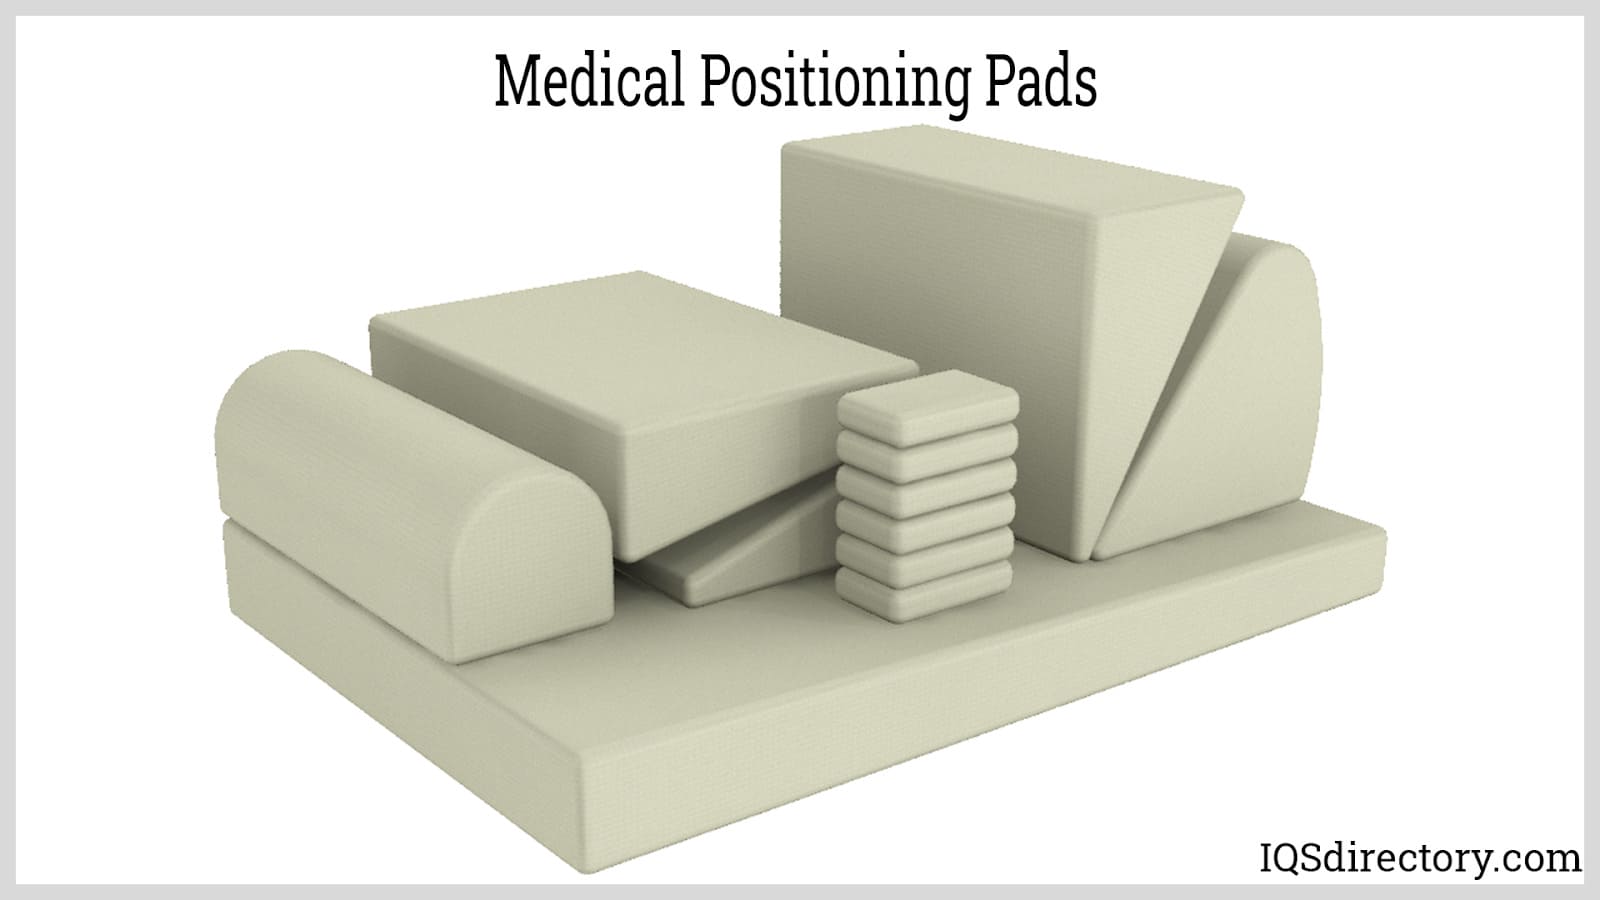 Medical Positioning Pads